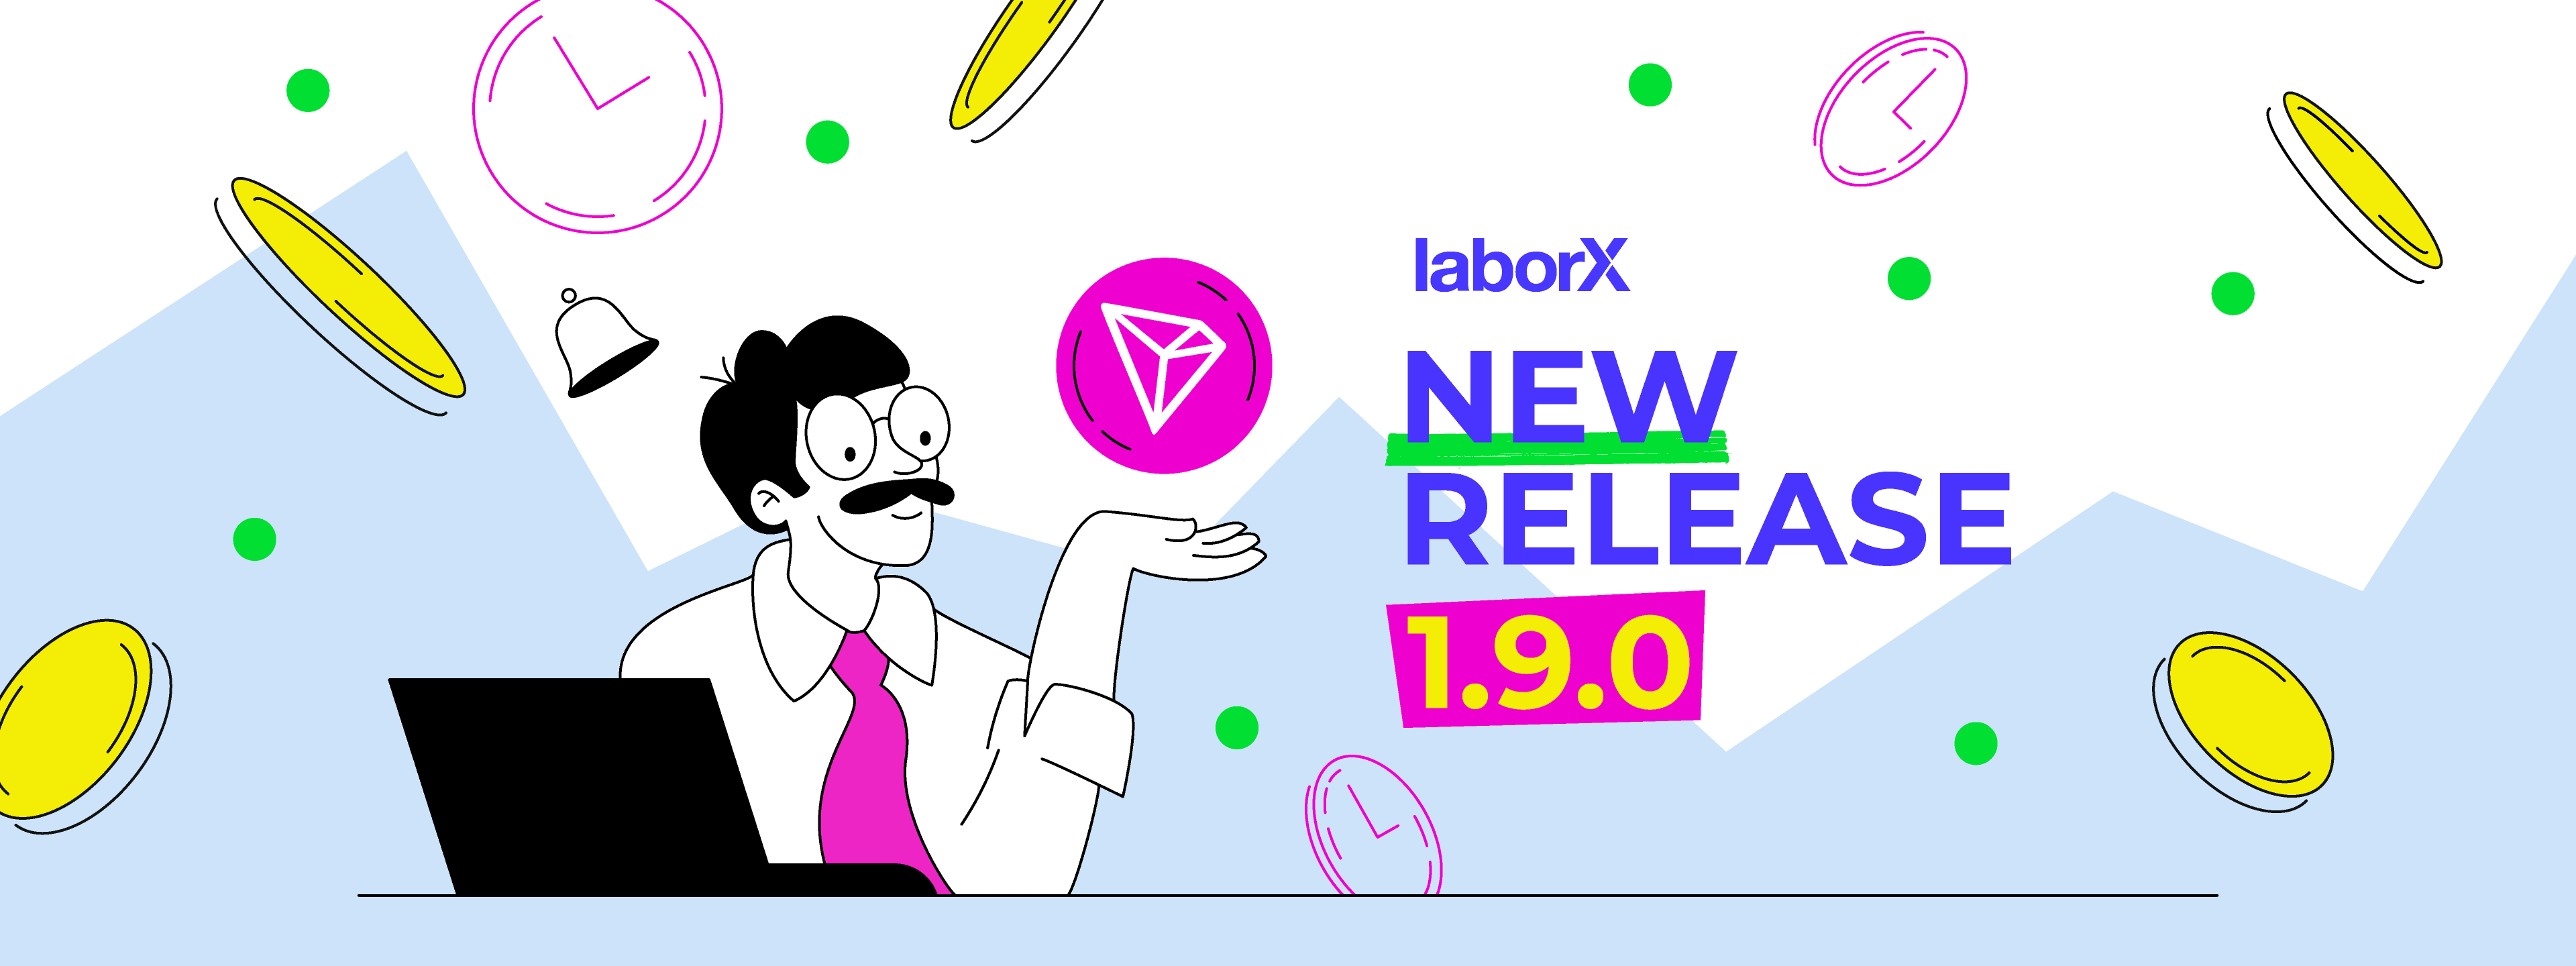 What’s New In LaborX Release 1.9.0?